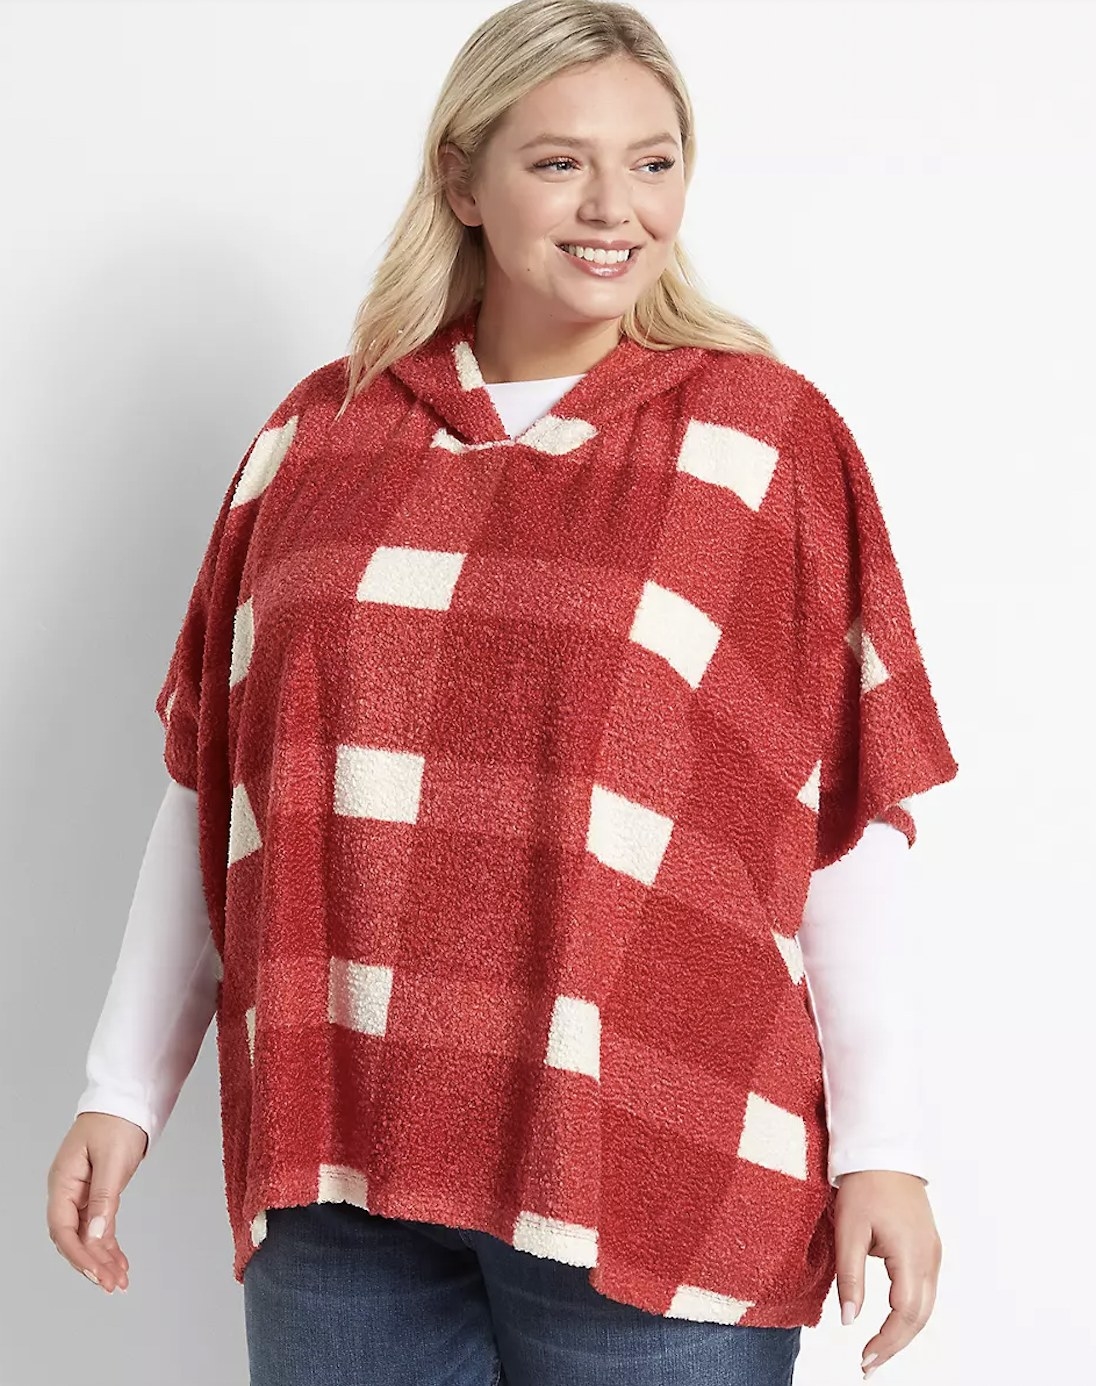 A person wearing a red and white plaid poncho, a white long sleeve shirt, and jeans